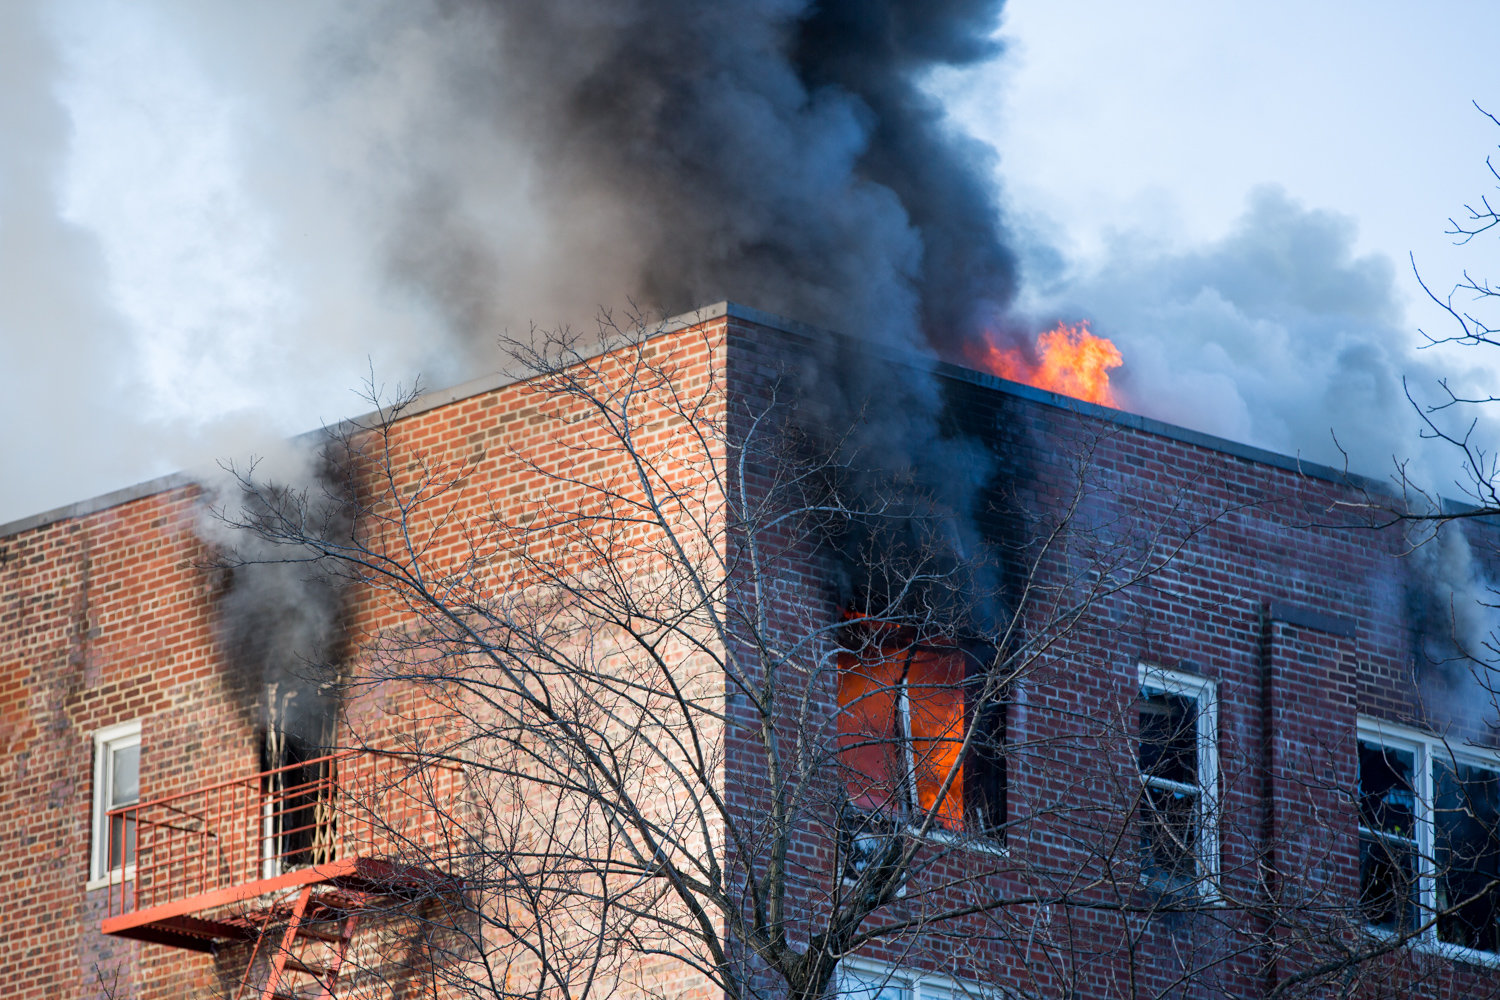 A fire rages in a sixth-floor apartment at 601 Kappock St. Firefighters contained the three-alarm blaze, which resulted in no injuries to residents.